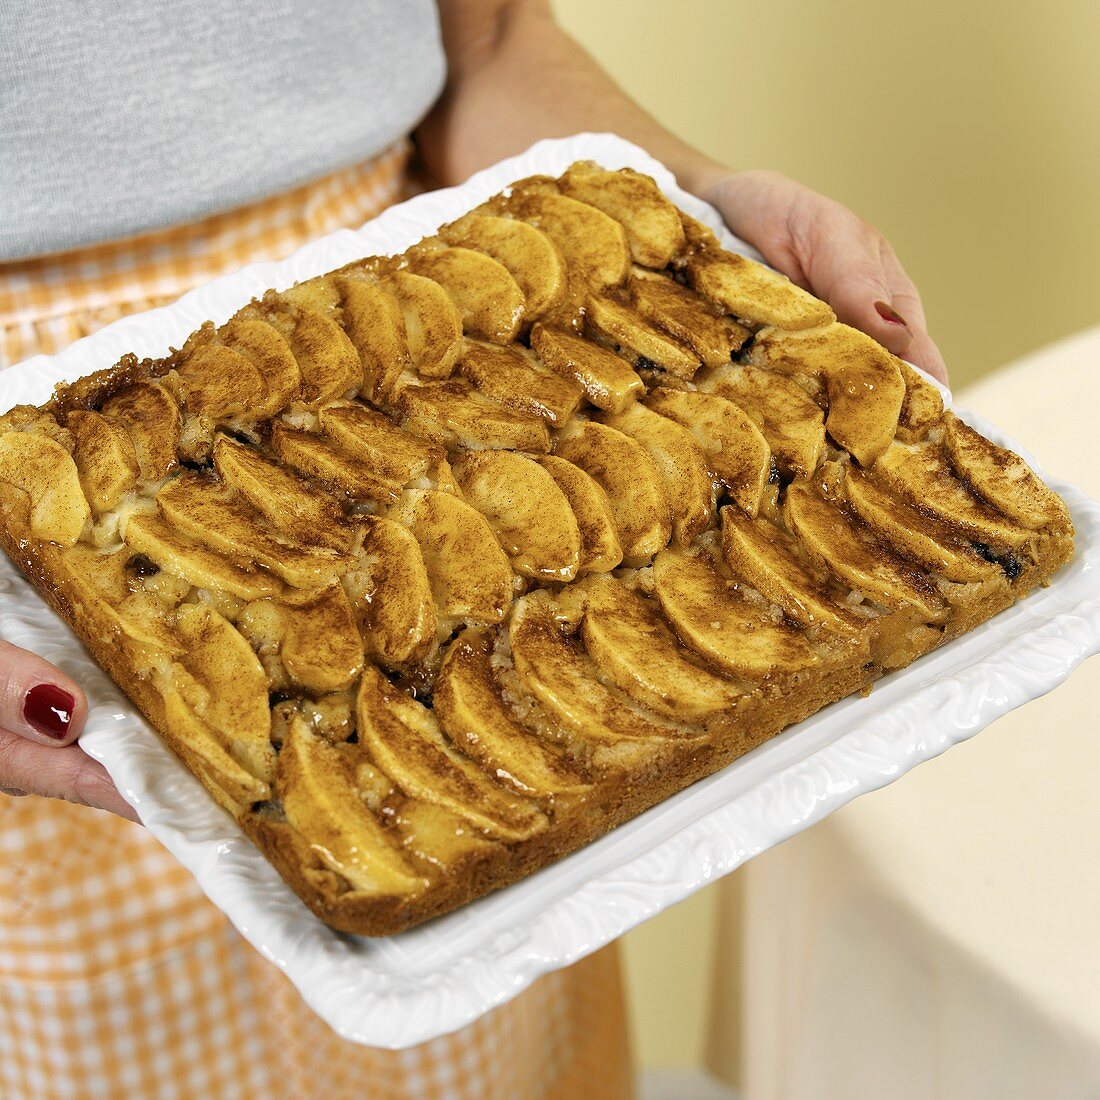 Woman serving tray of freshly baked apple cake